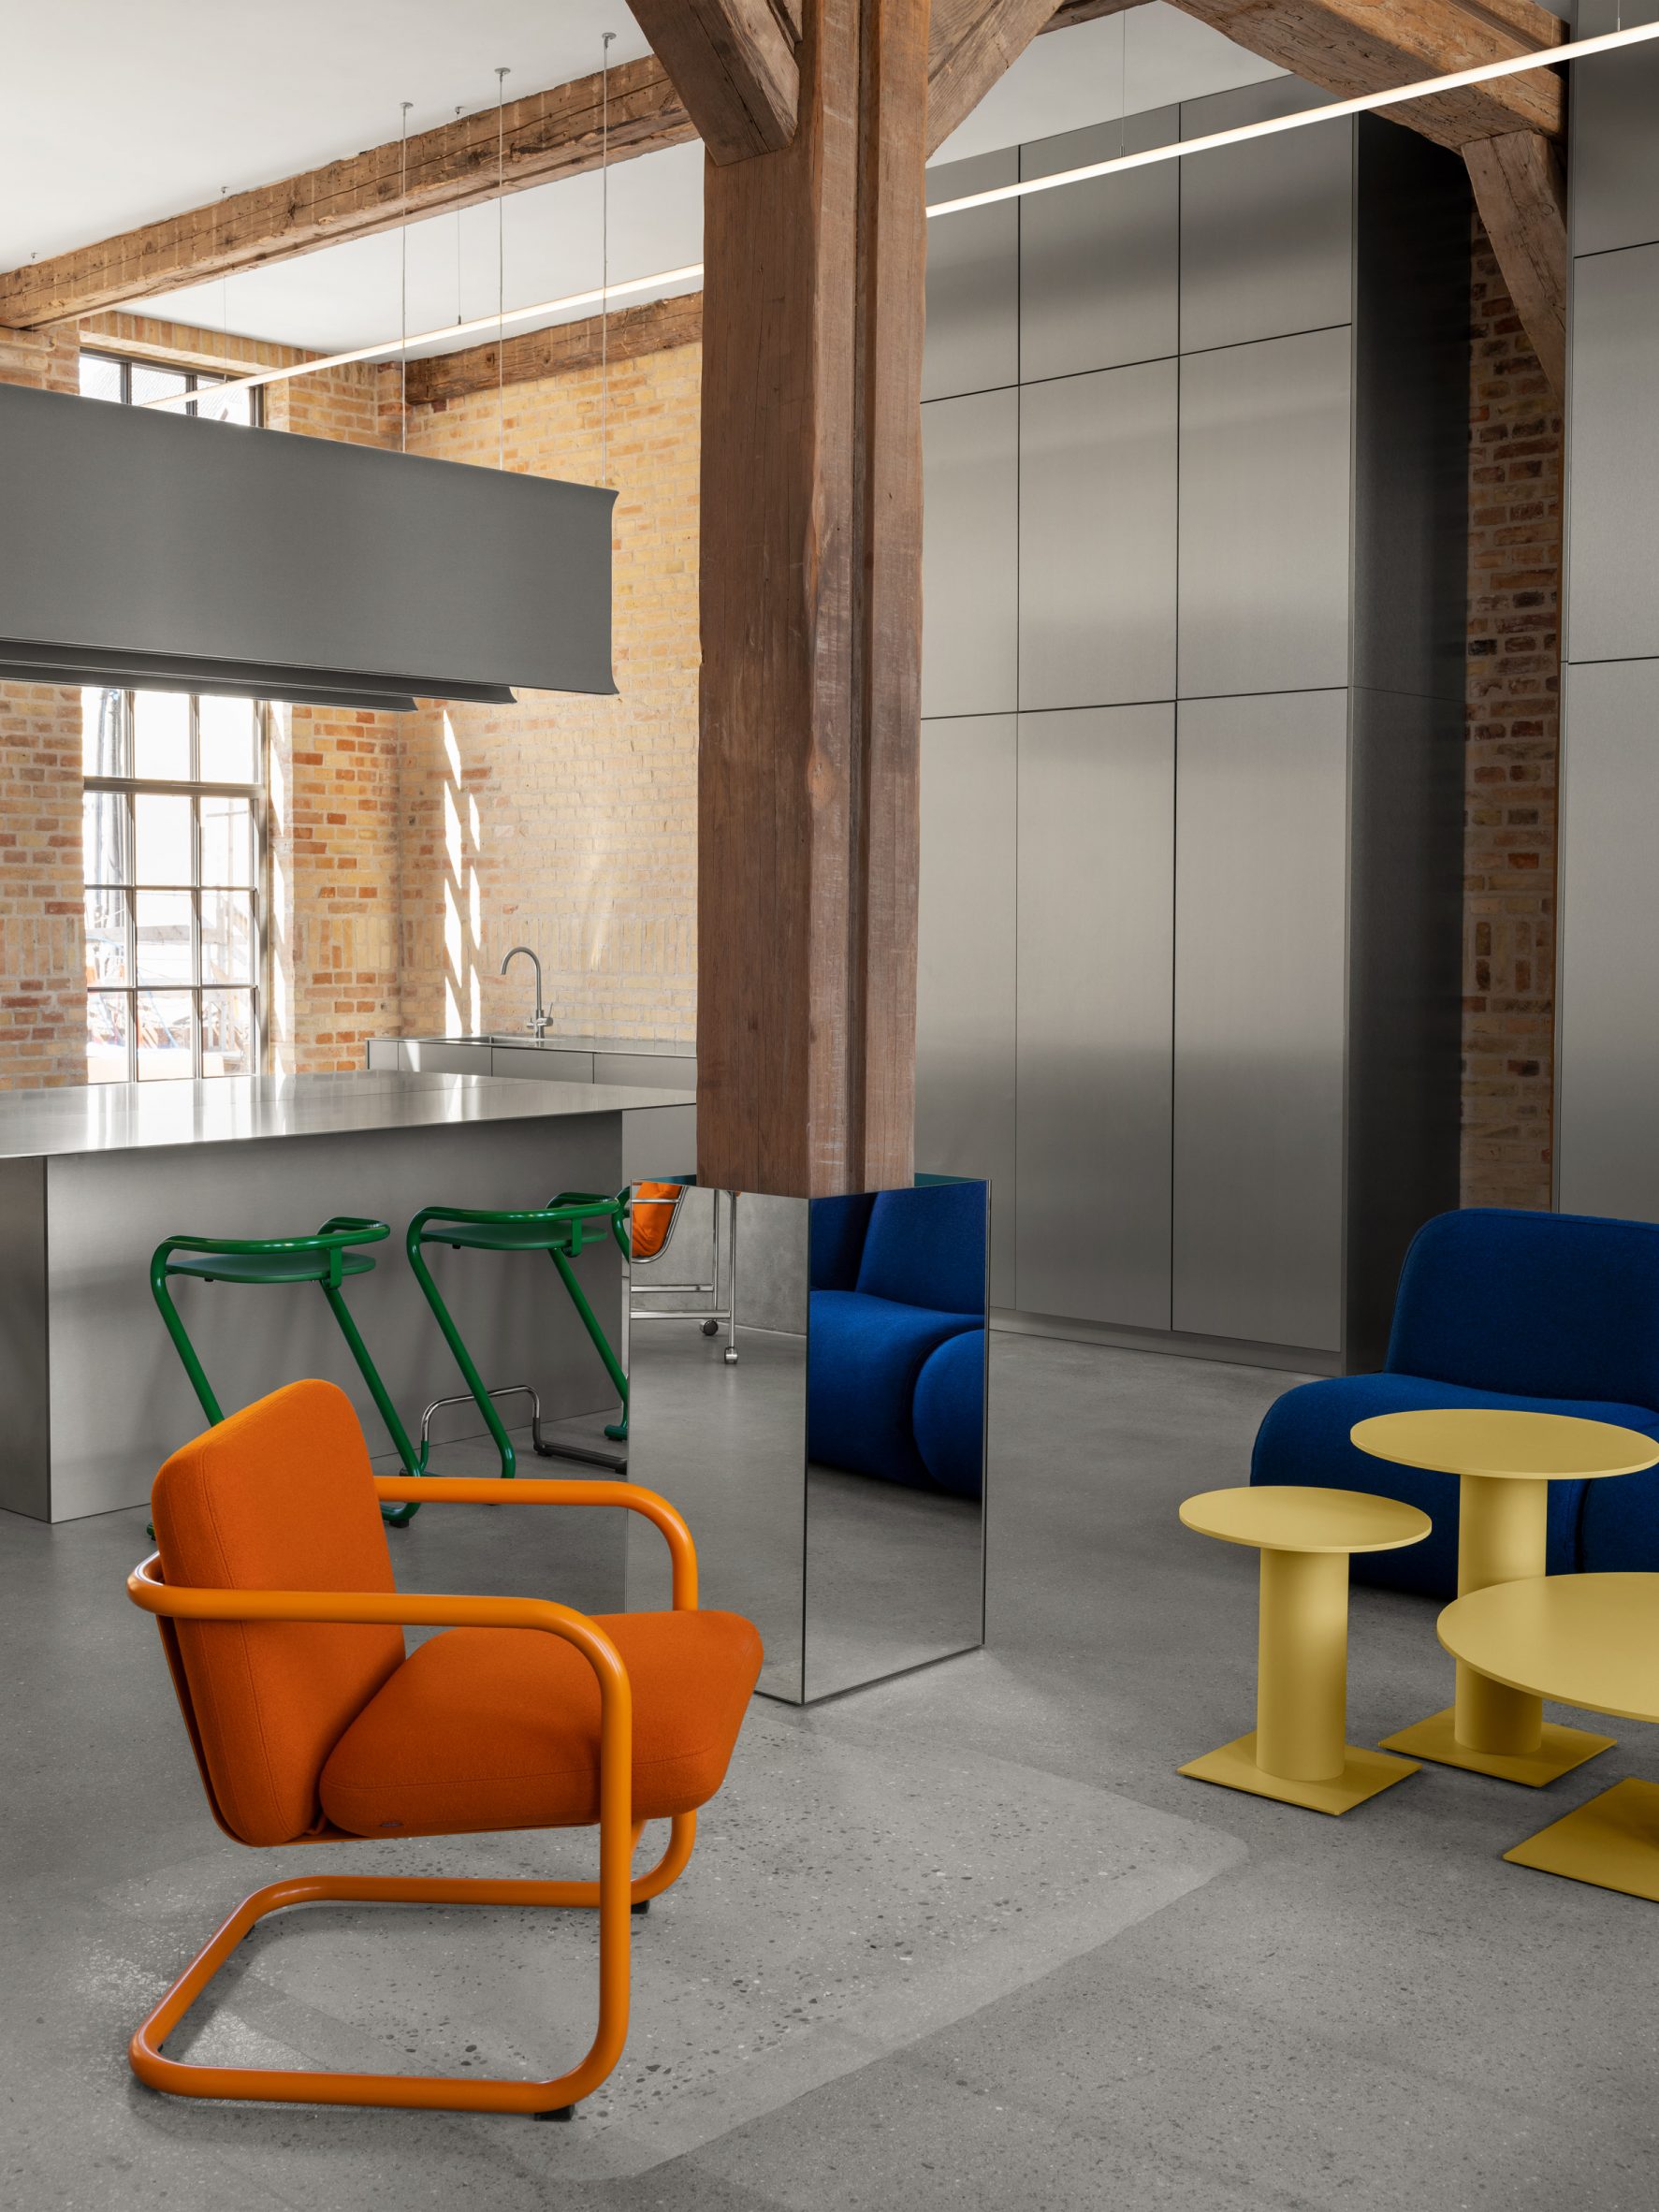 Lammhults Design Group orange chairs, green stools and yellow tables